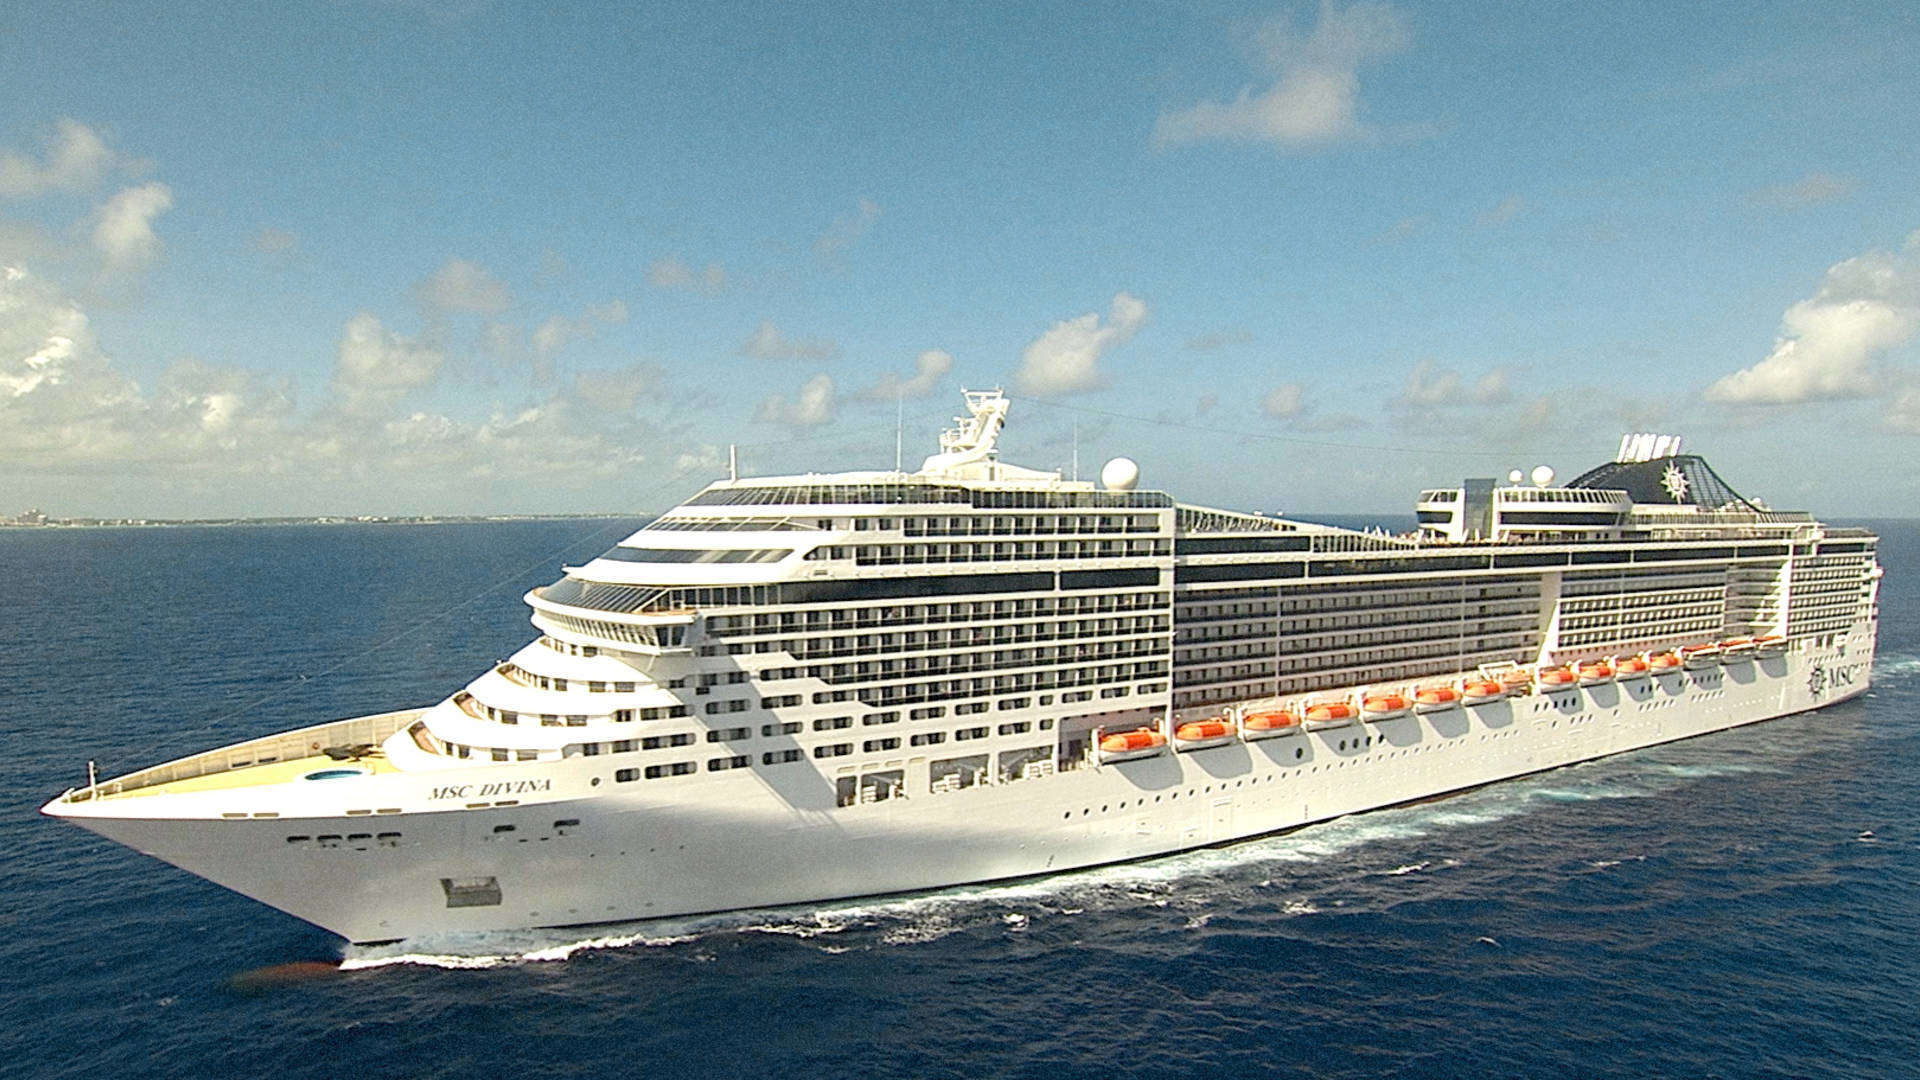 Watch Mighty Cruise Ships Season 2 Episode 6 MSC Divina Full show on